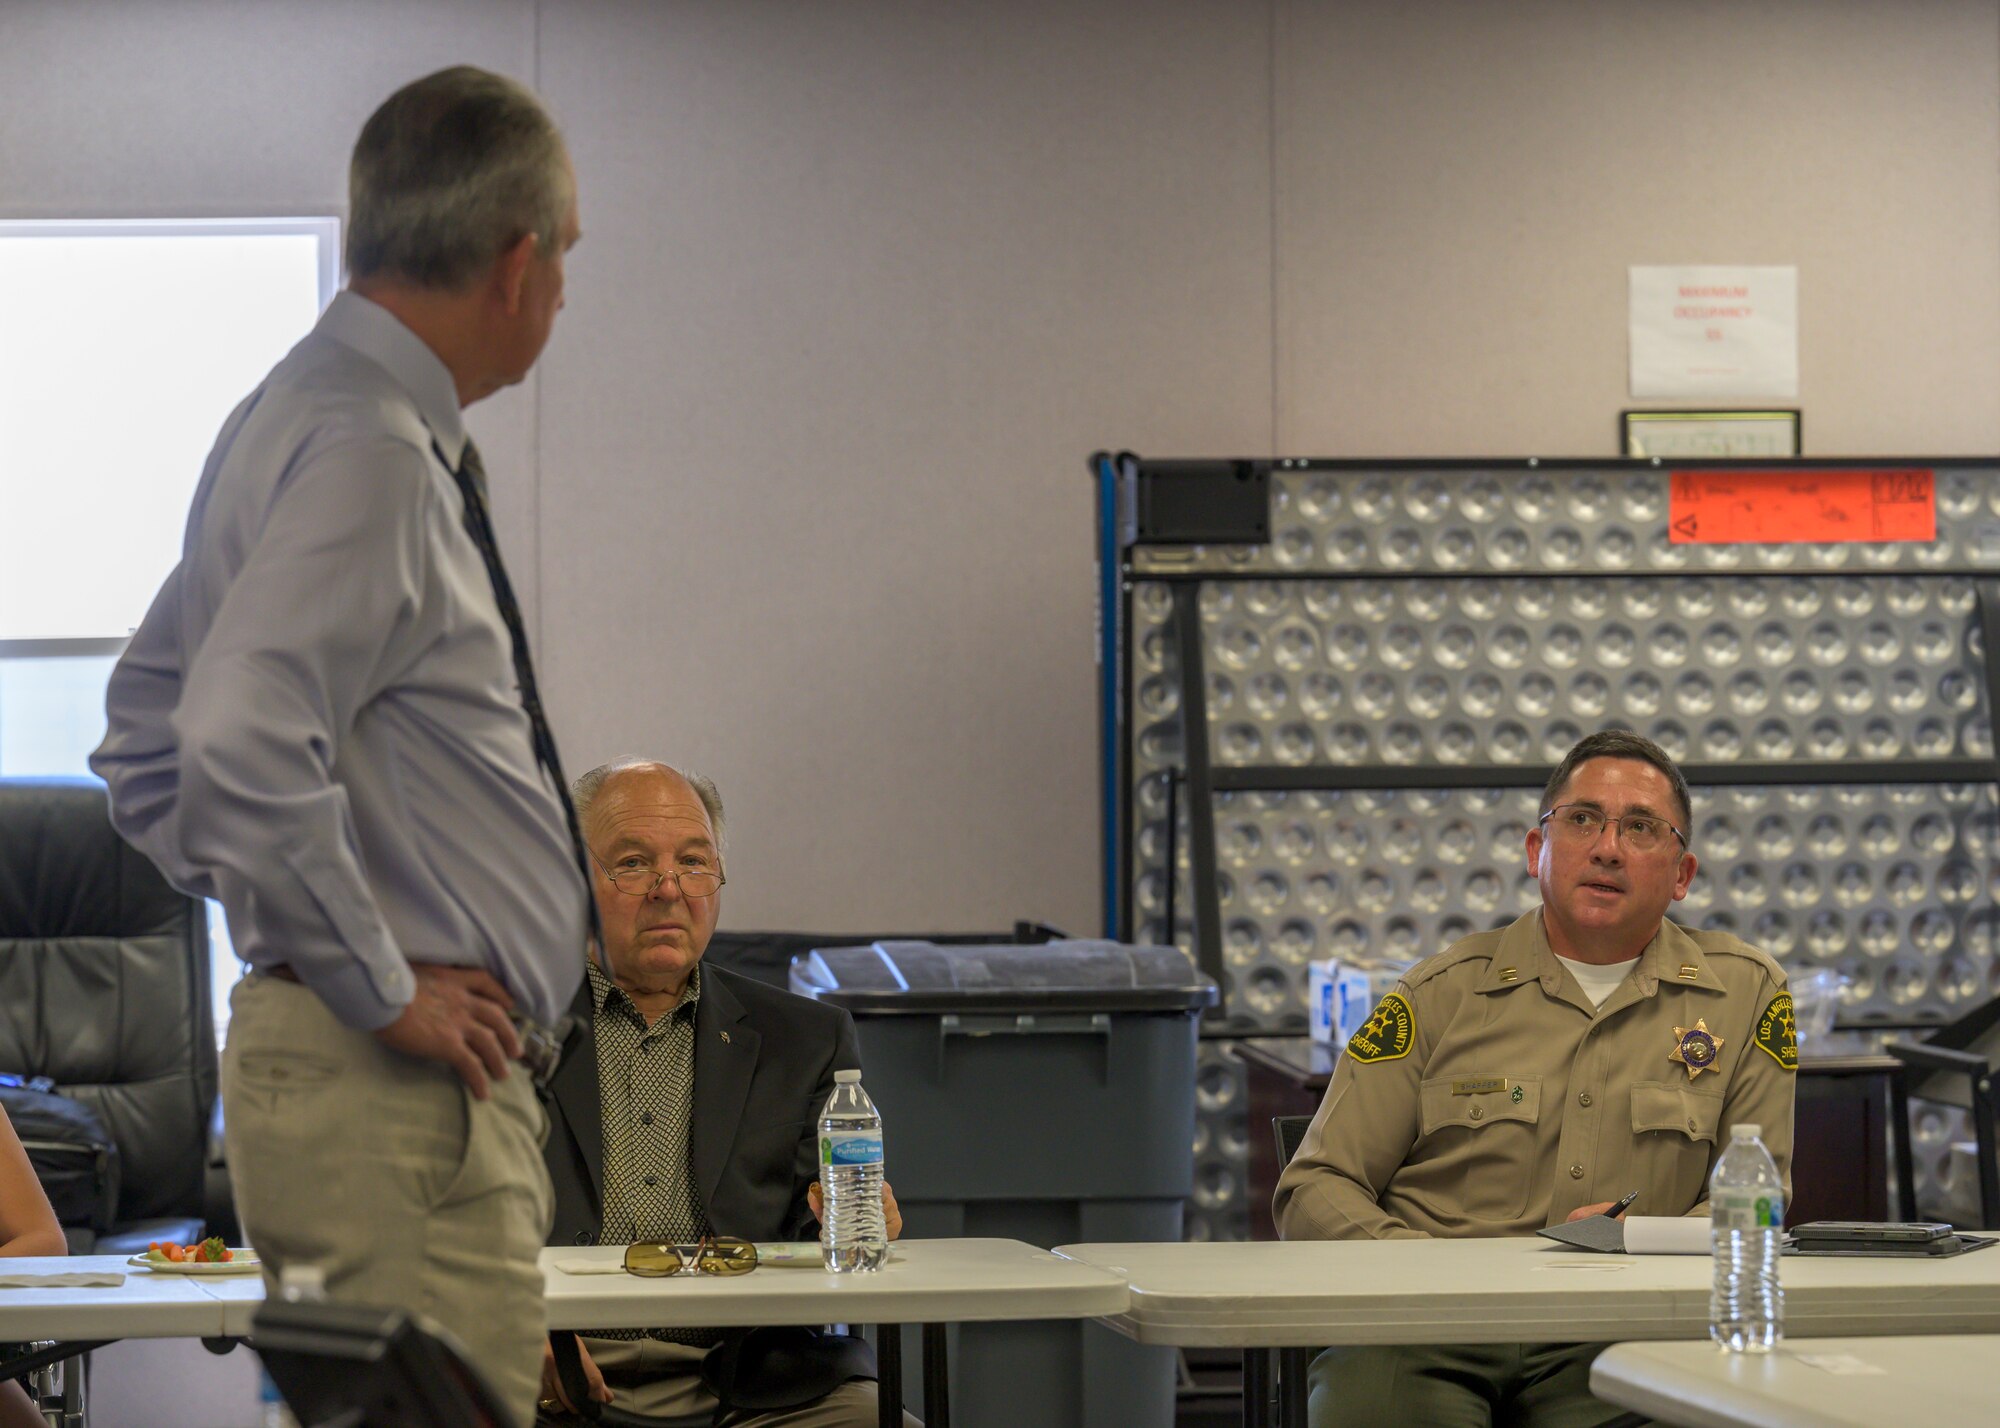 Captain Ronald Shaffer, Los Angeles County Sheriff's Department Palmdale Station commander, talks to Dr. David Smith, Plant 42 director, during a special meeting to discuss traffic safety at Plant 42 in Palmdale, California, June 30. (Air Force photo by Giancarlo Casem)